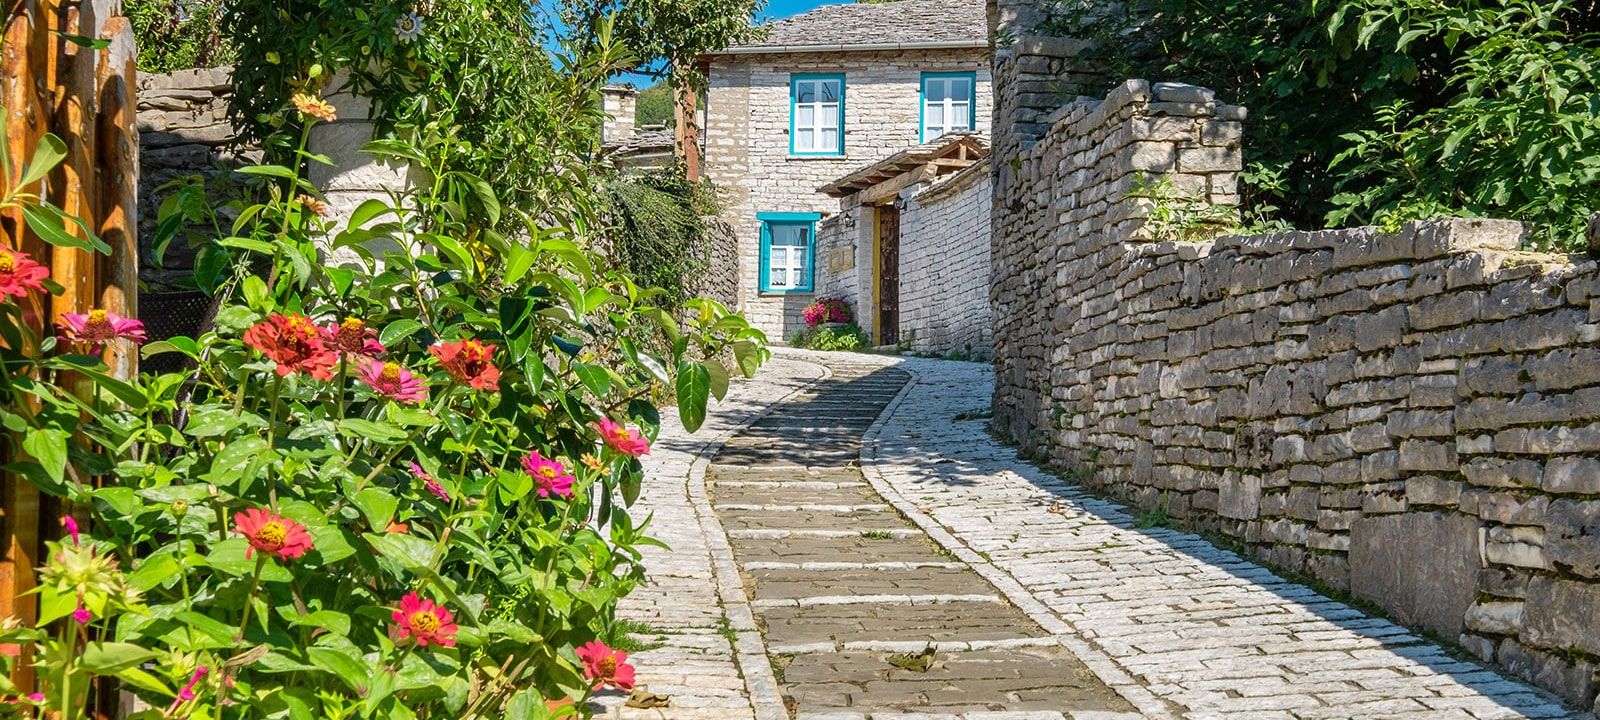 The destination of Zagori for a trip with Greek Adventure